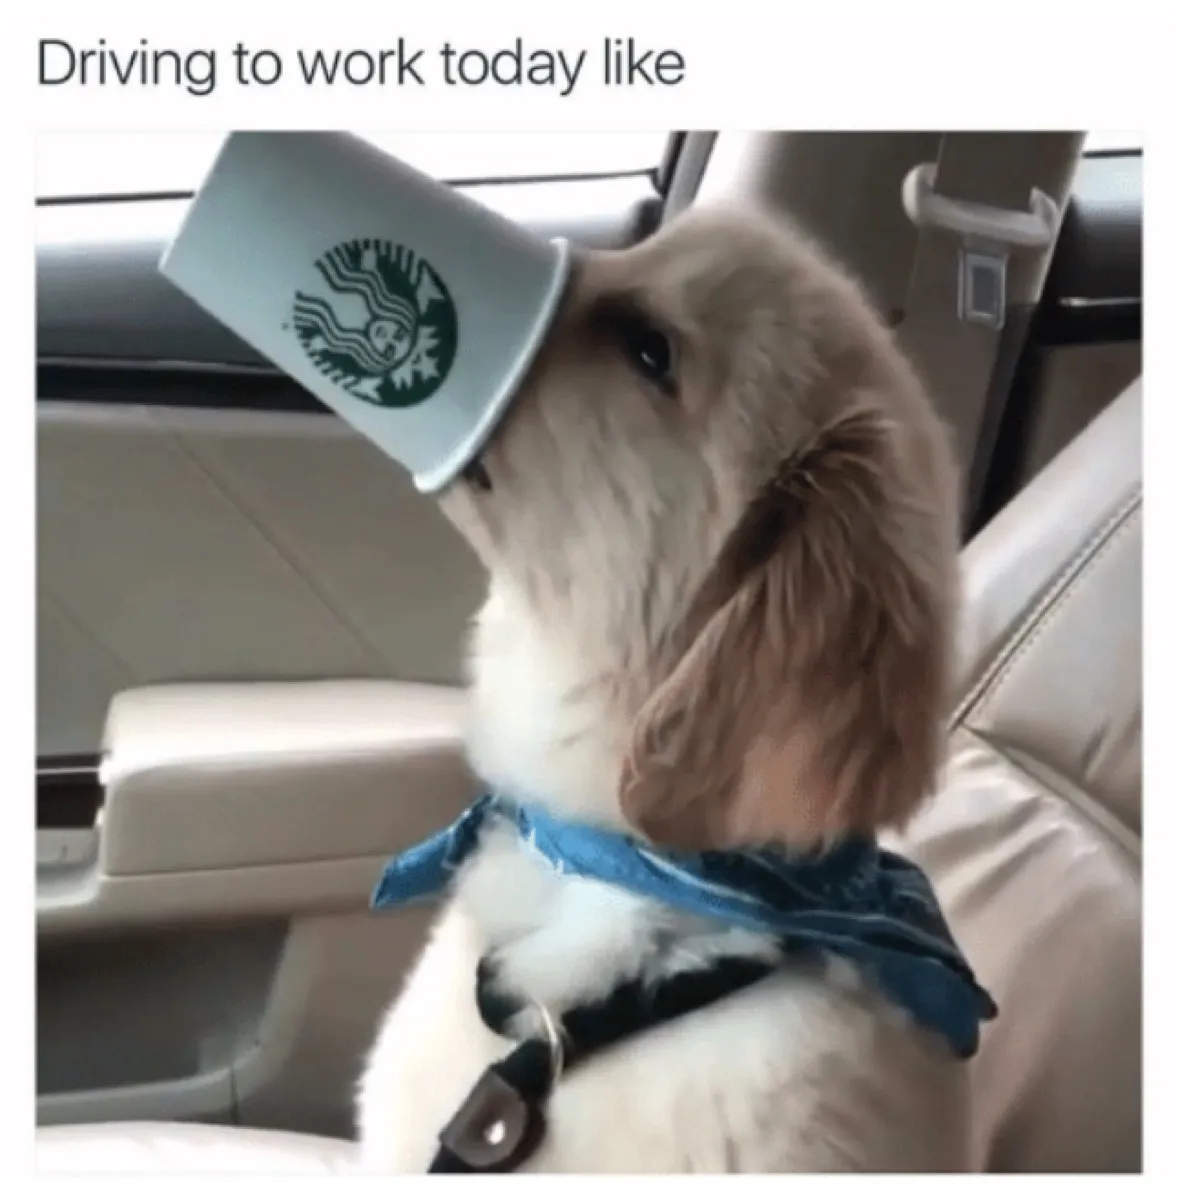 dog on the way to work starbucks cup funny work memes